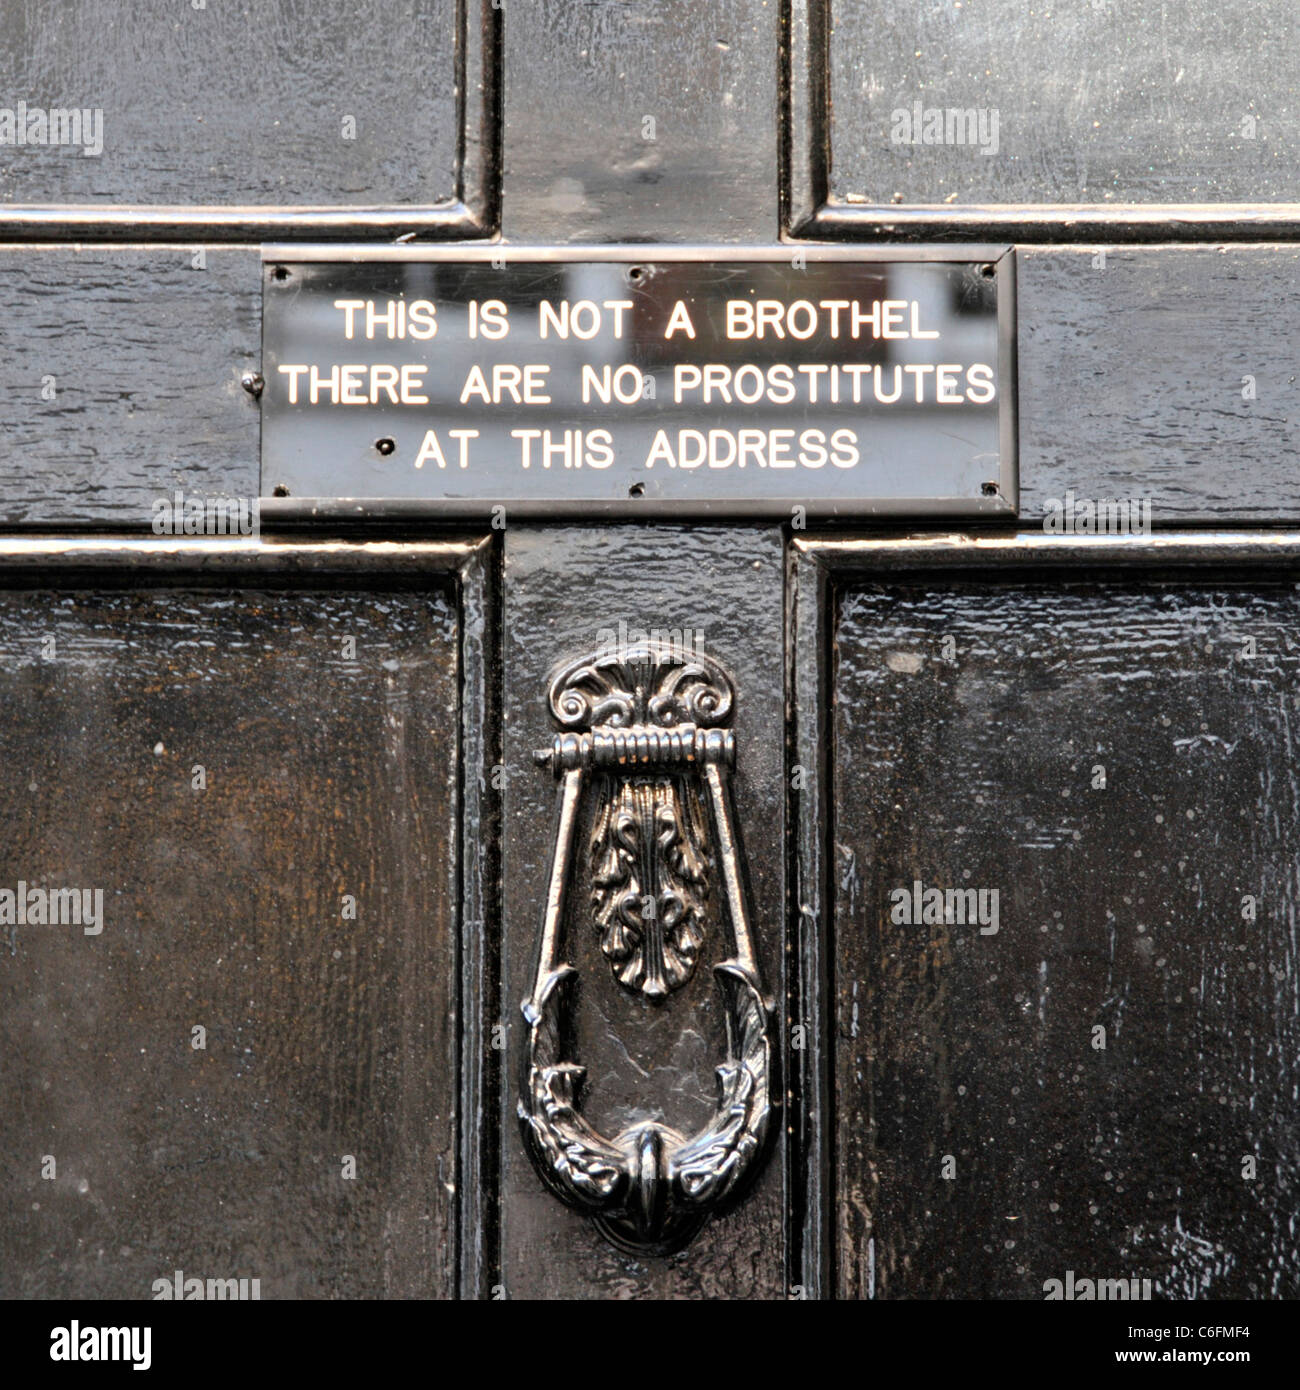 Close up black front door unusual sign in Soho explains premises not a brothel presumably because of nuisance caller using knocker West End London UK Stock Photo